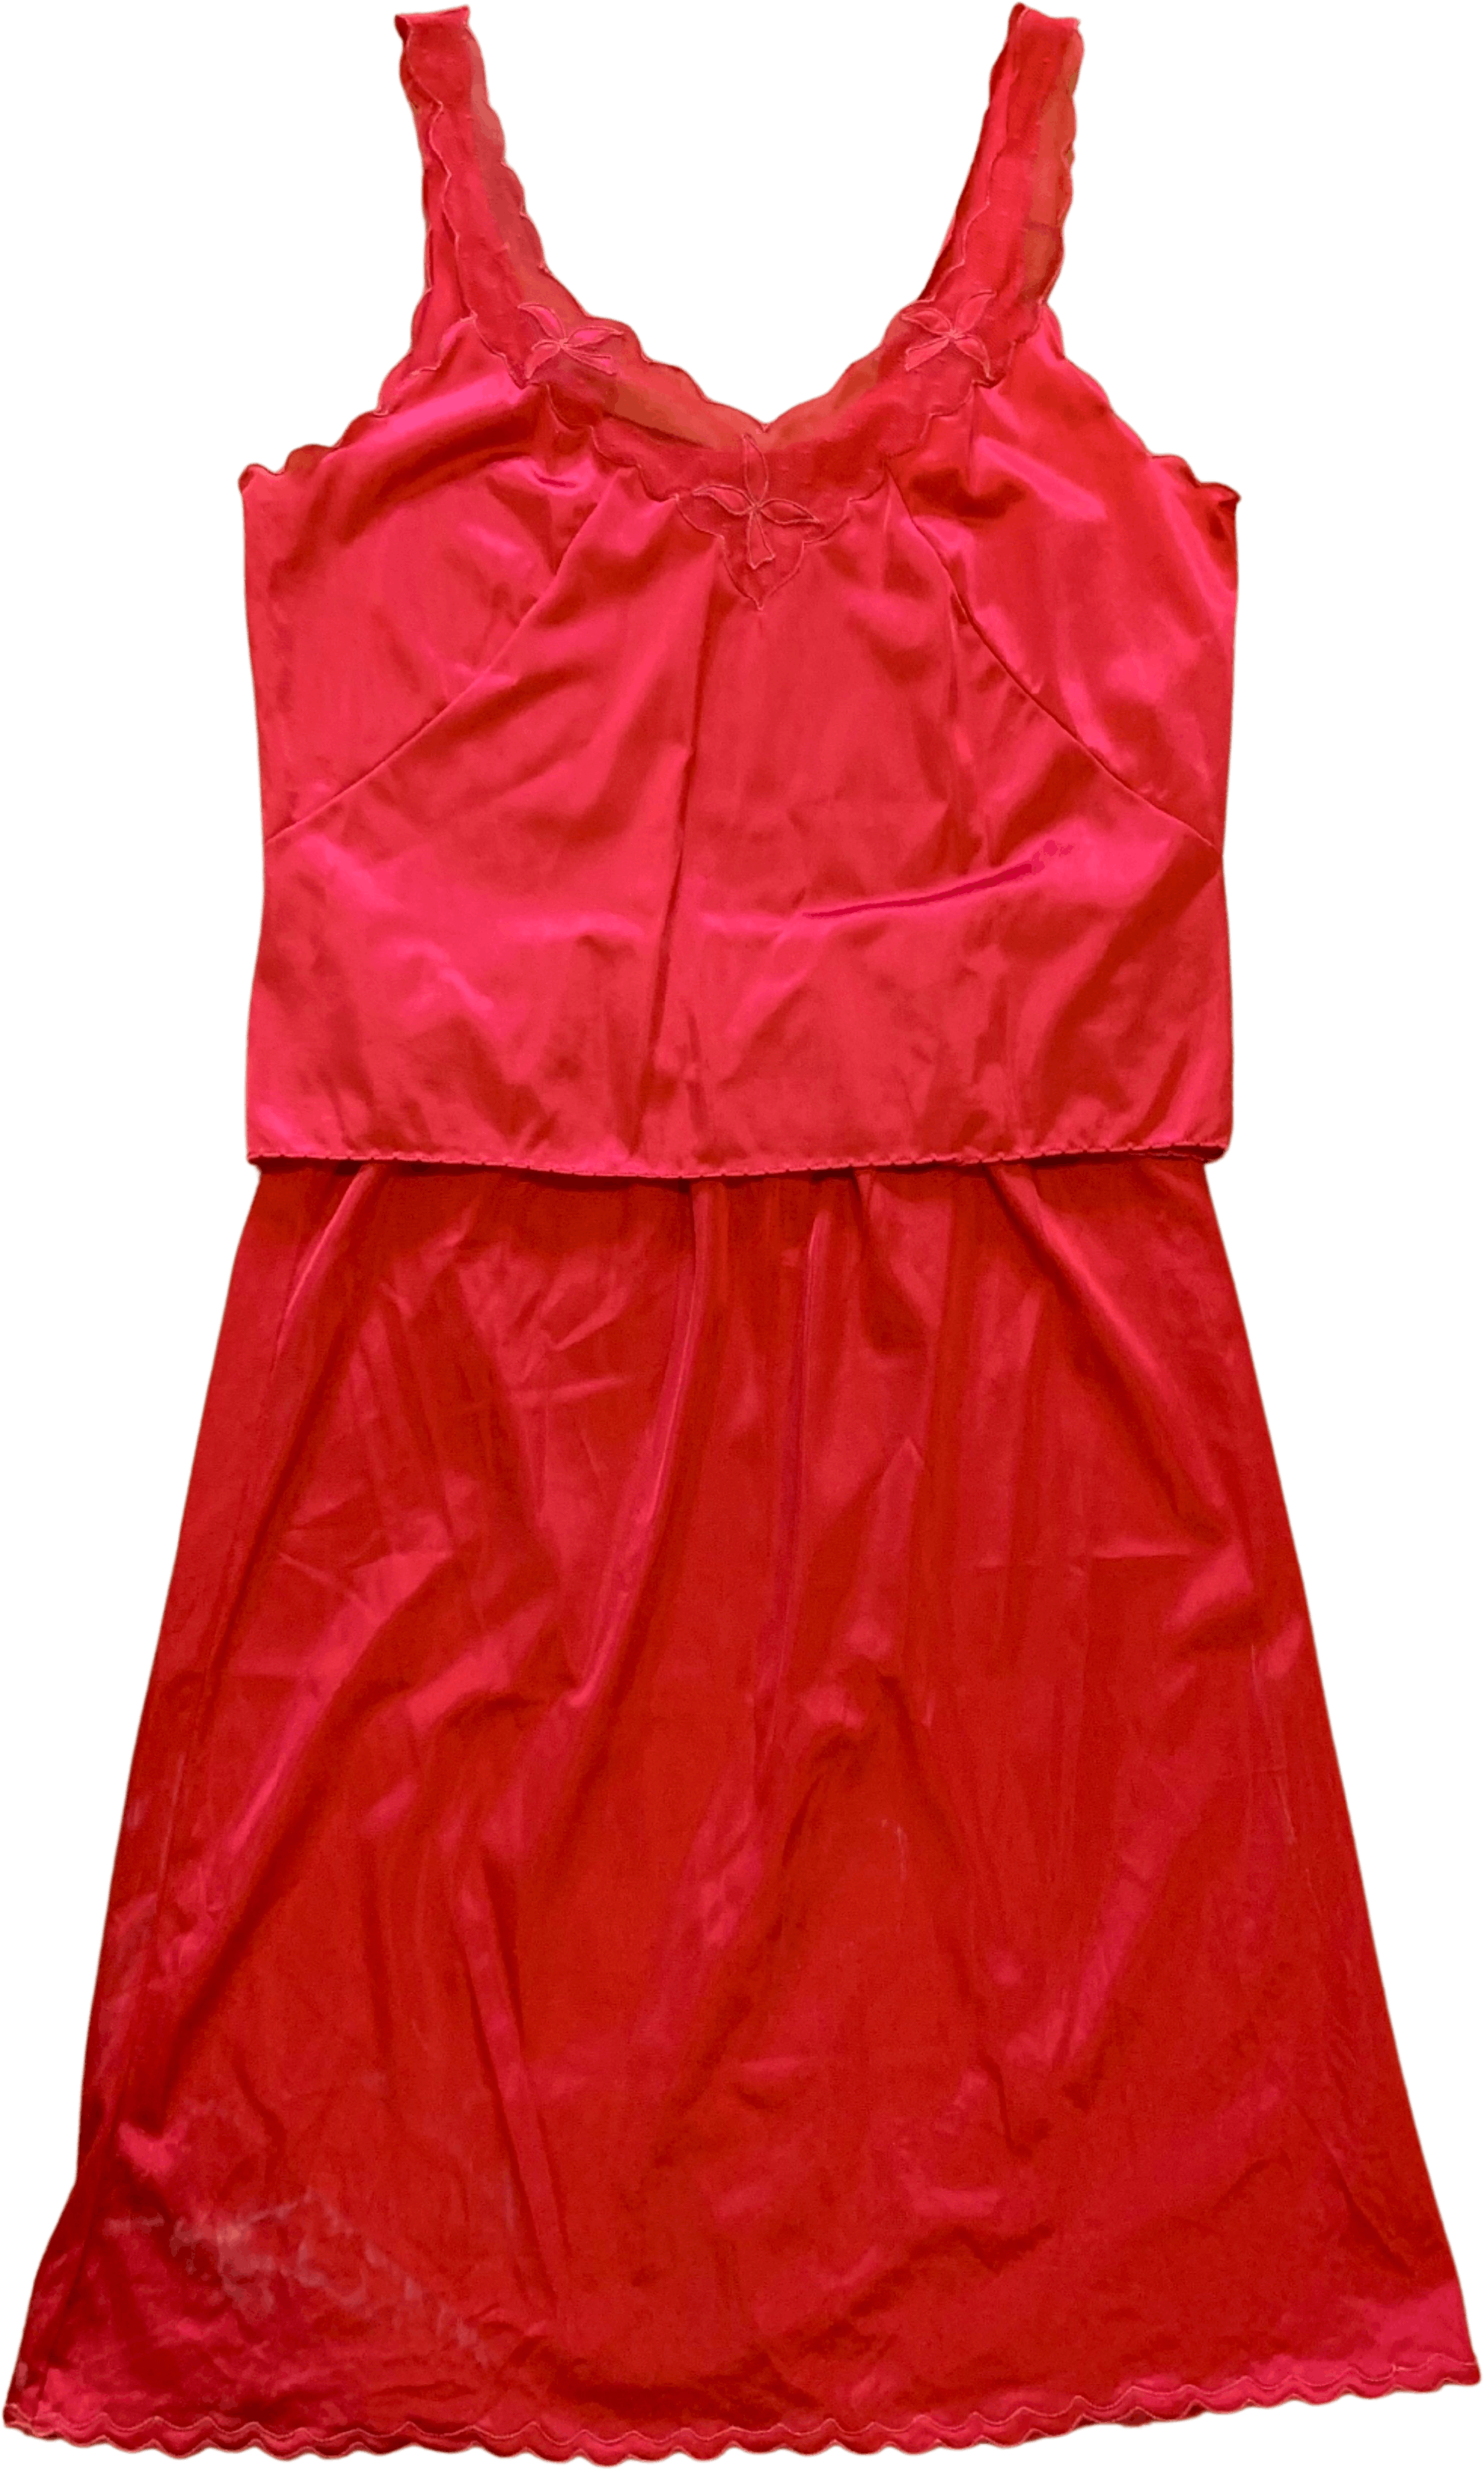 Vintage 80's Red Camisole Slip Set by Sears | Shop THRILLING